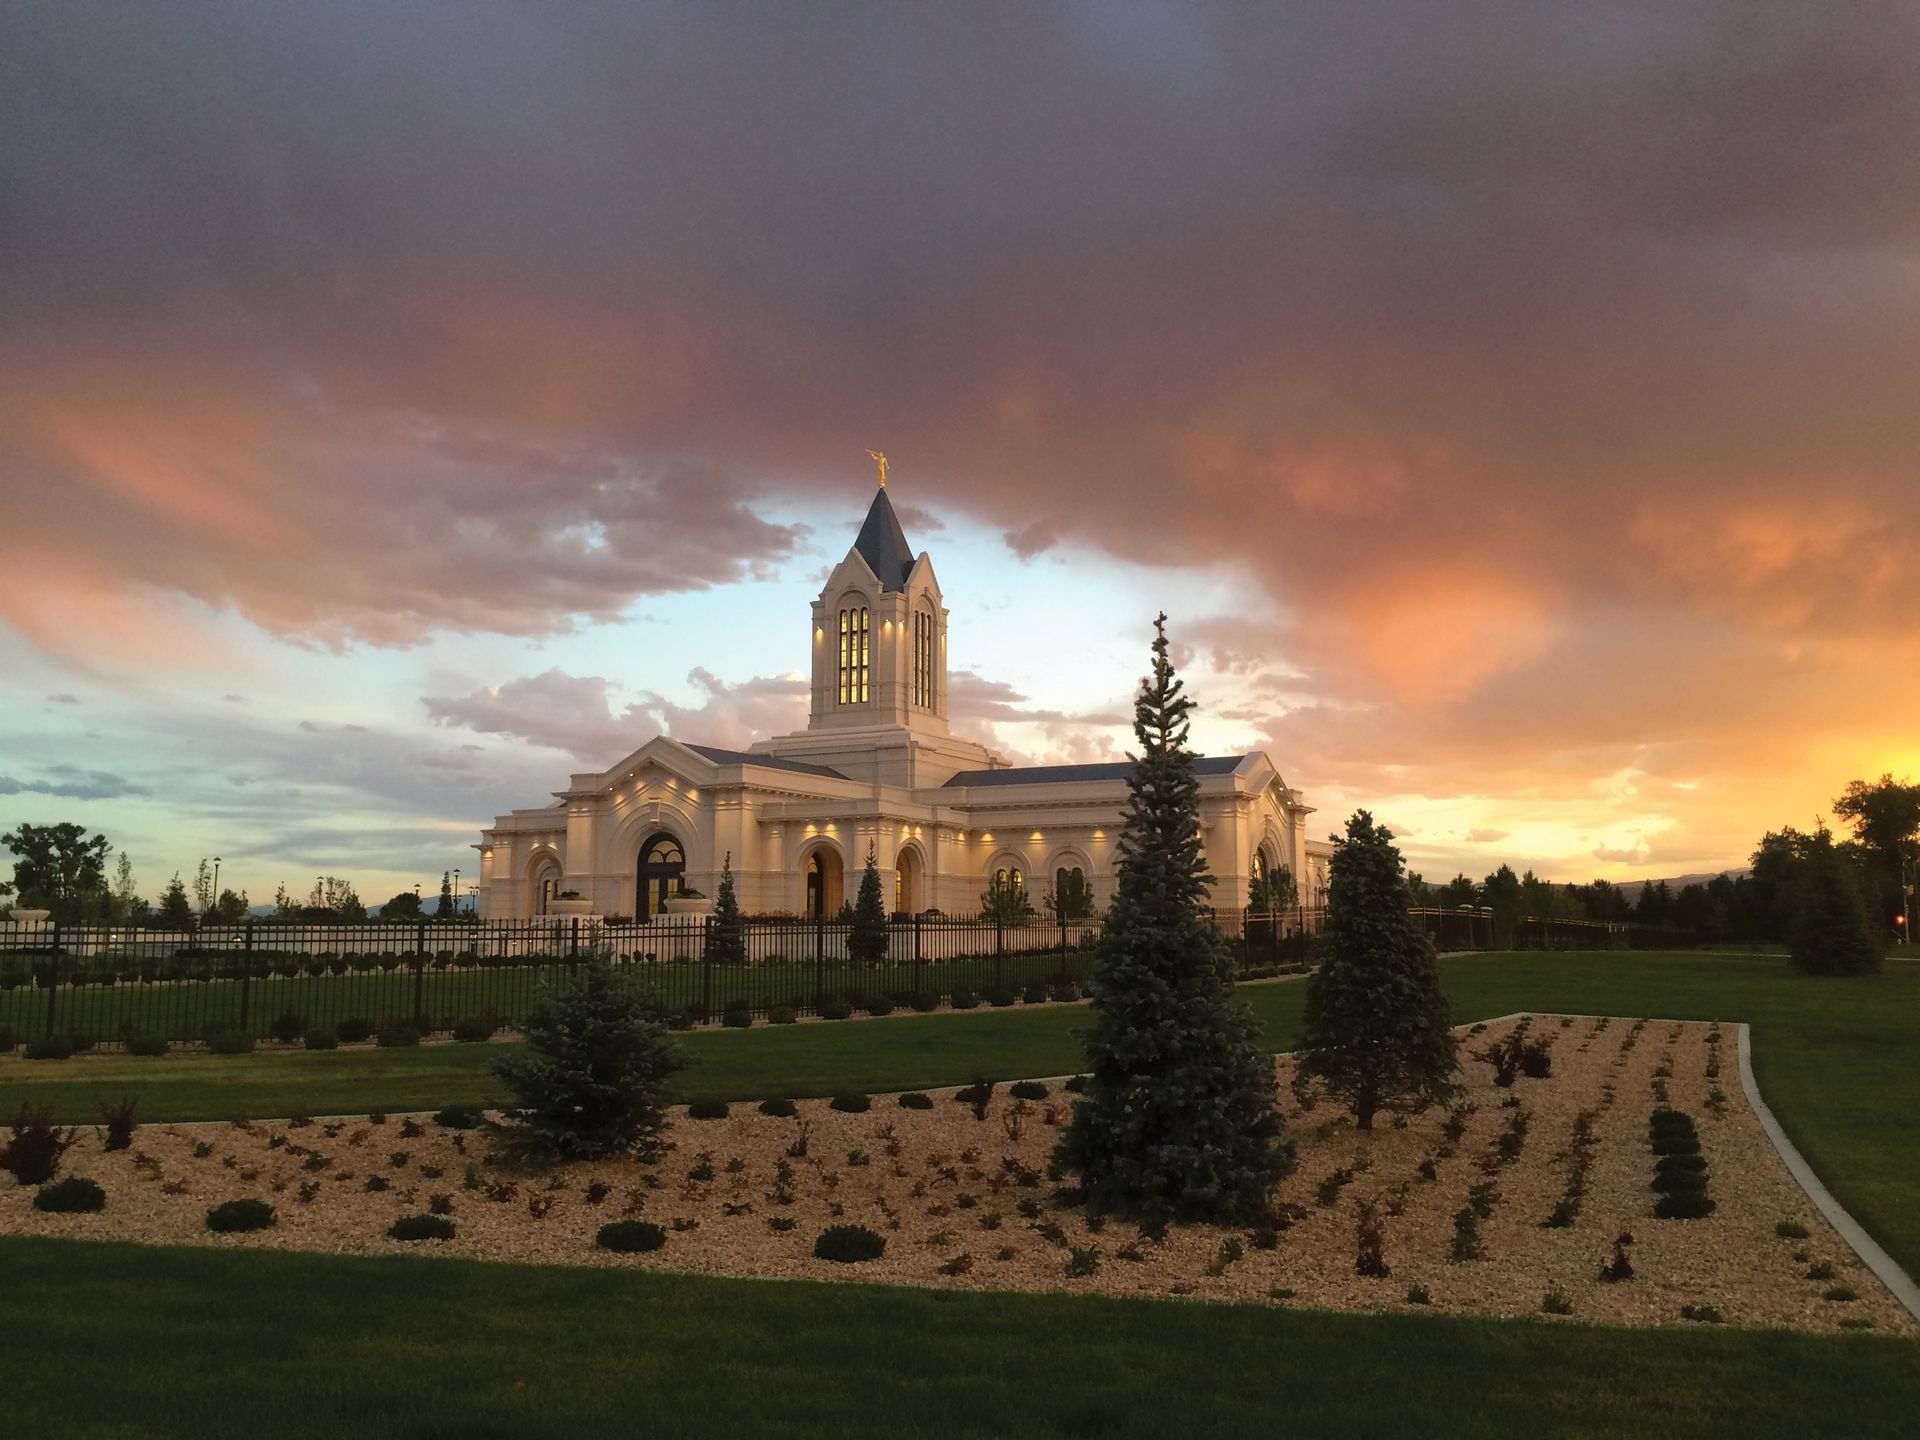 An exterior view of the Fort Collins Colorado Temple at sunset.